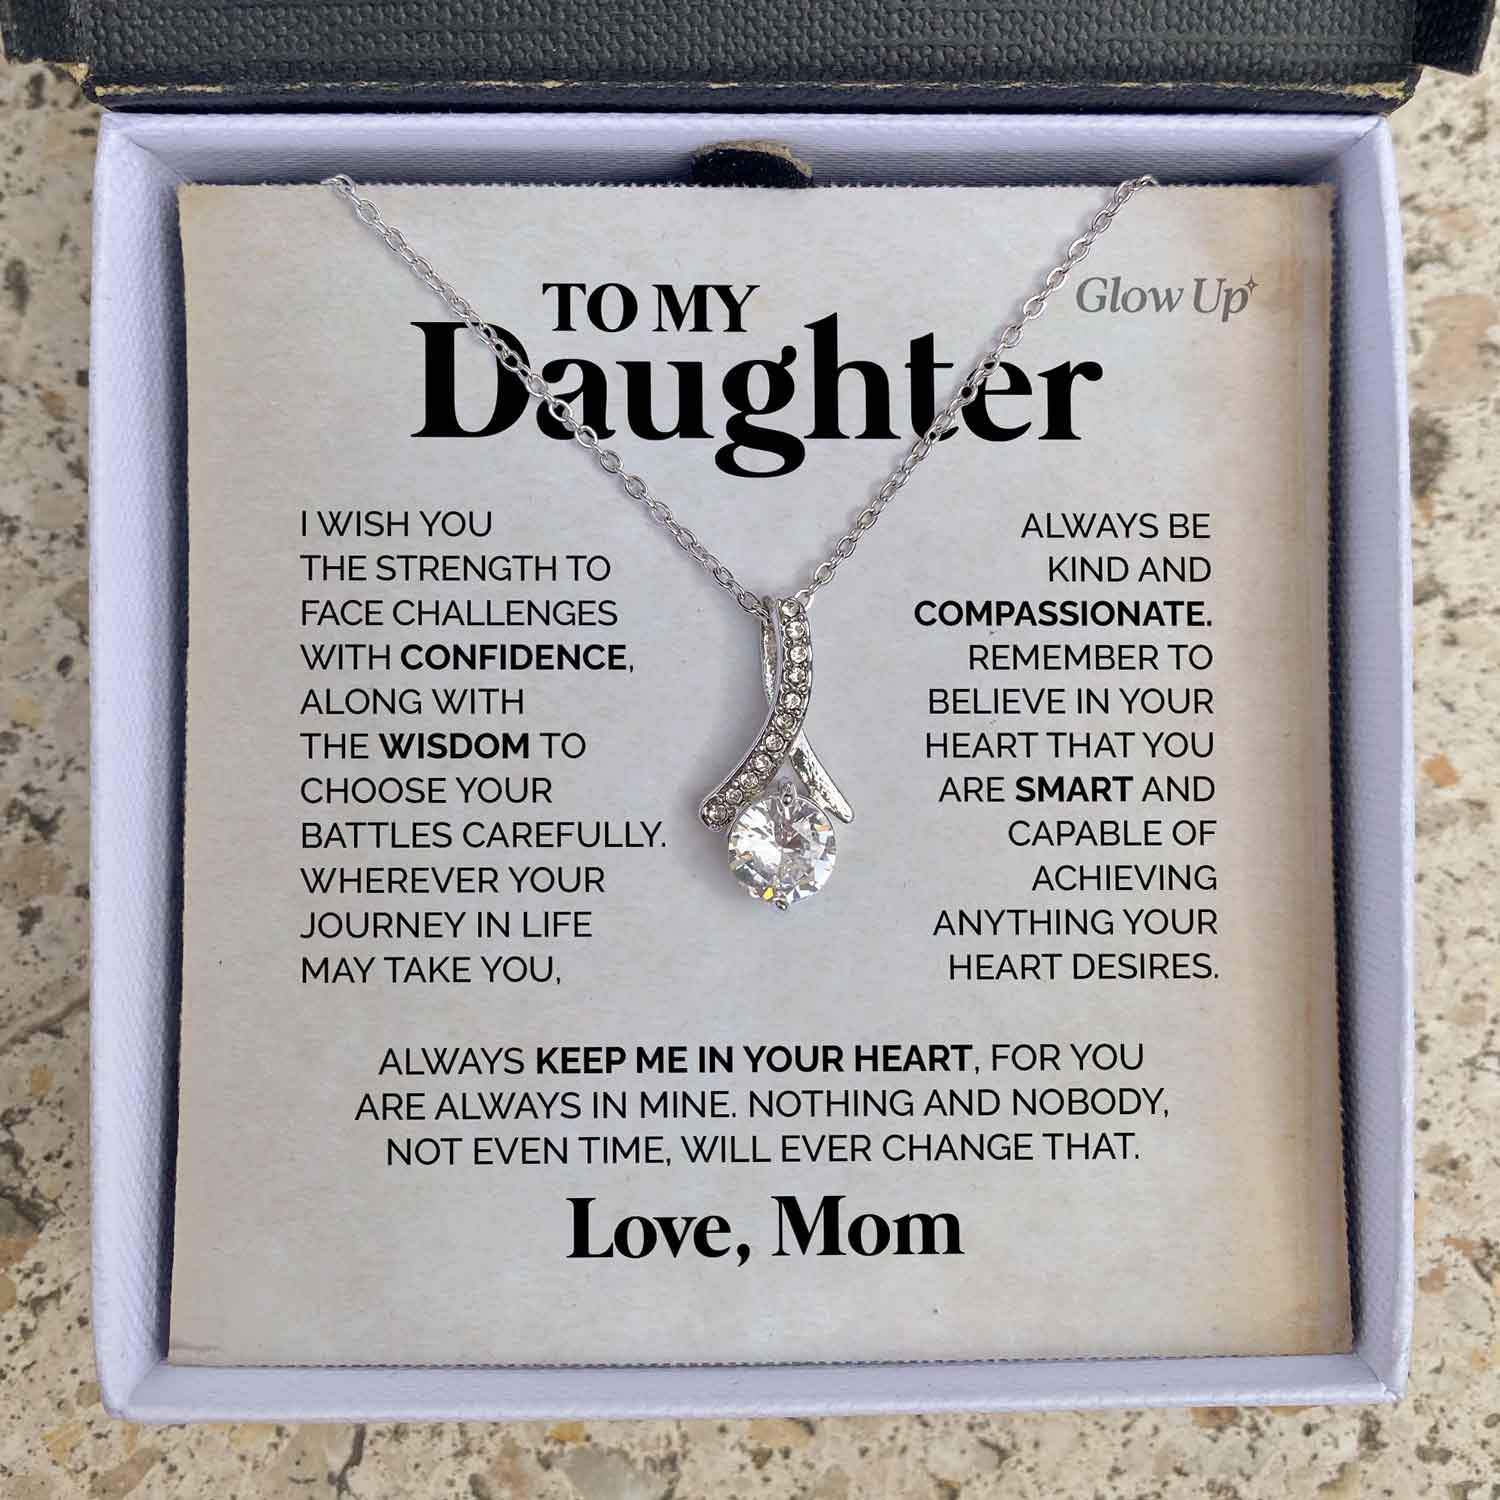 ShineOn Fulfillment Jewelry 14K White Gold Finish / Standard Box To My Daughter - Keep me in your heart - Ribbon necklace